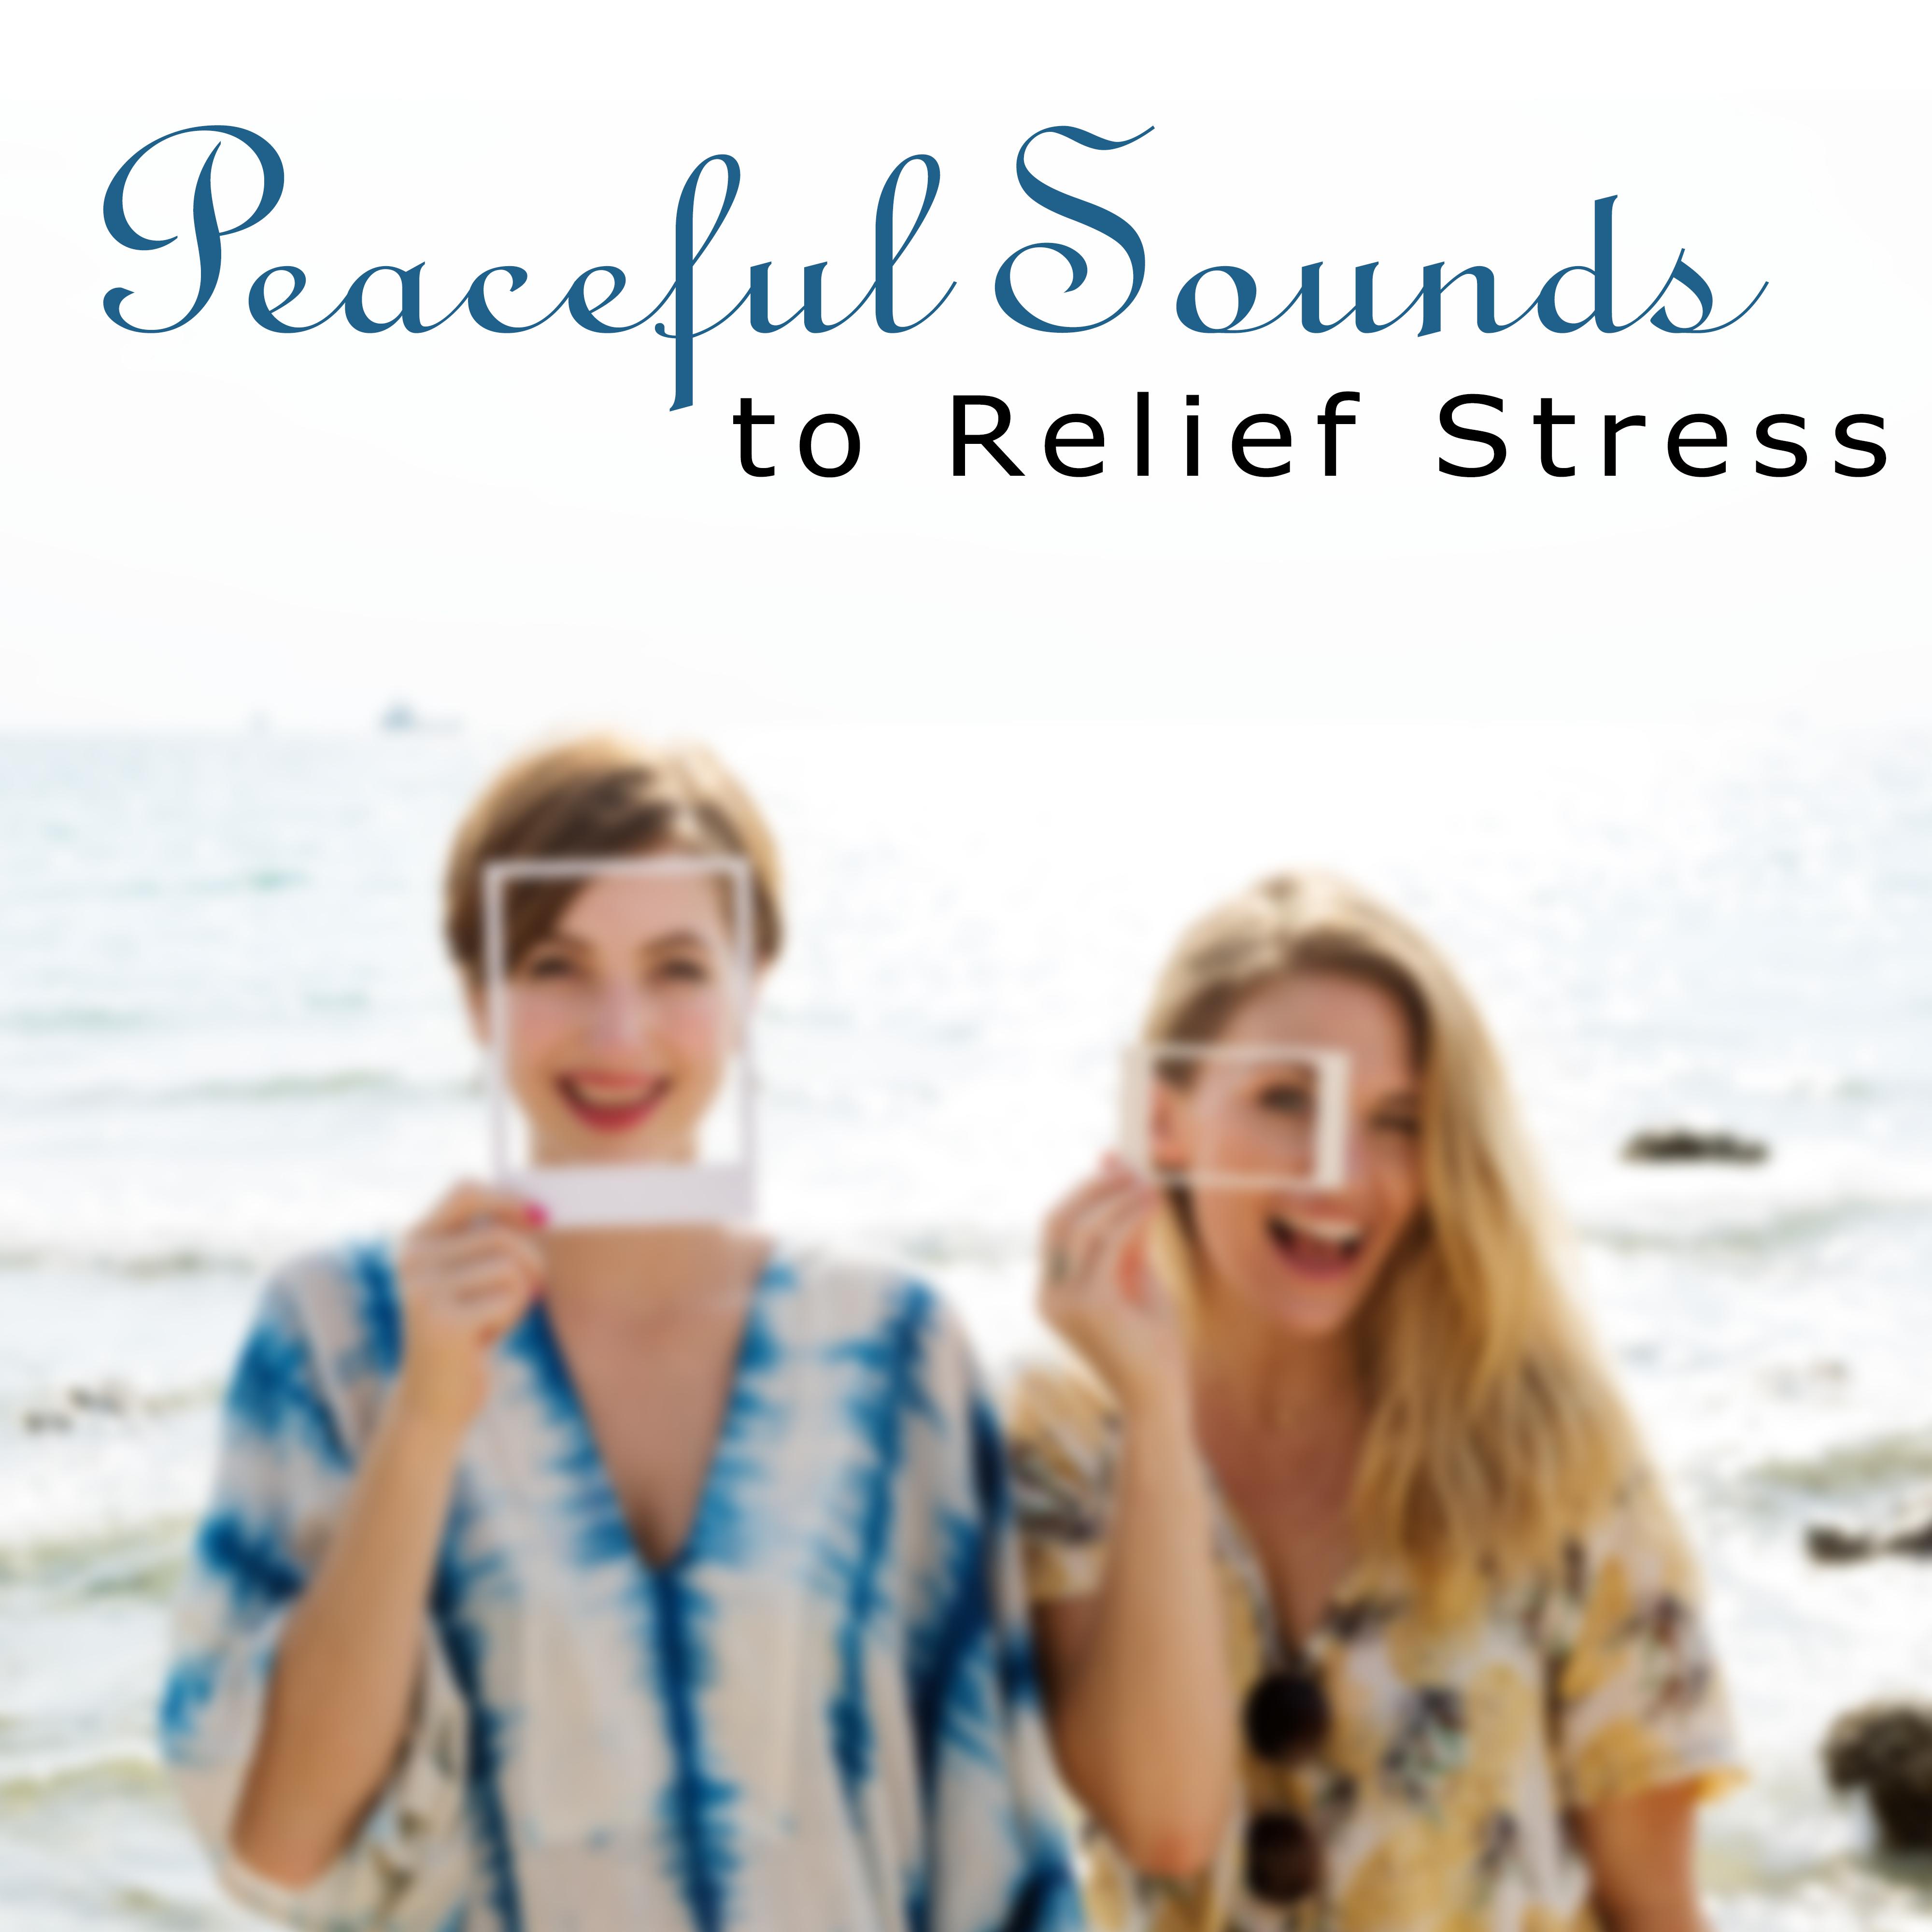 Peaceful Sounds to Relief Stress  Easy Listening, Calming Waves, New Age Relaxation, Music to Calm Mind, Rest a Bit